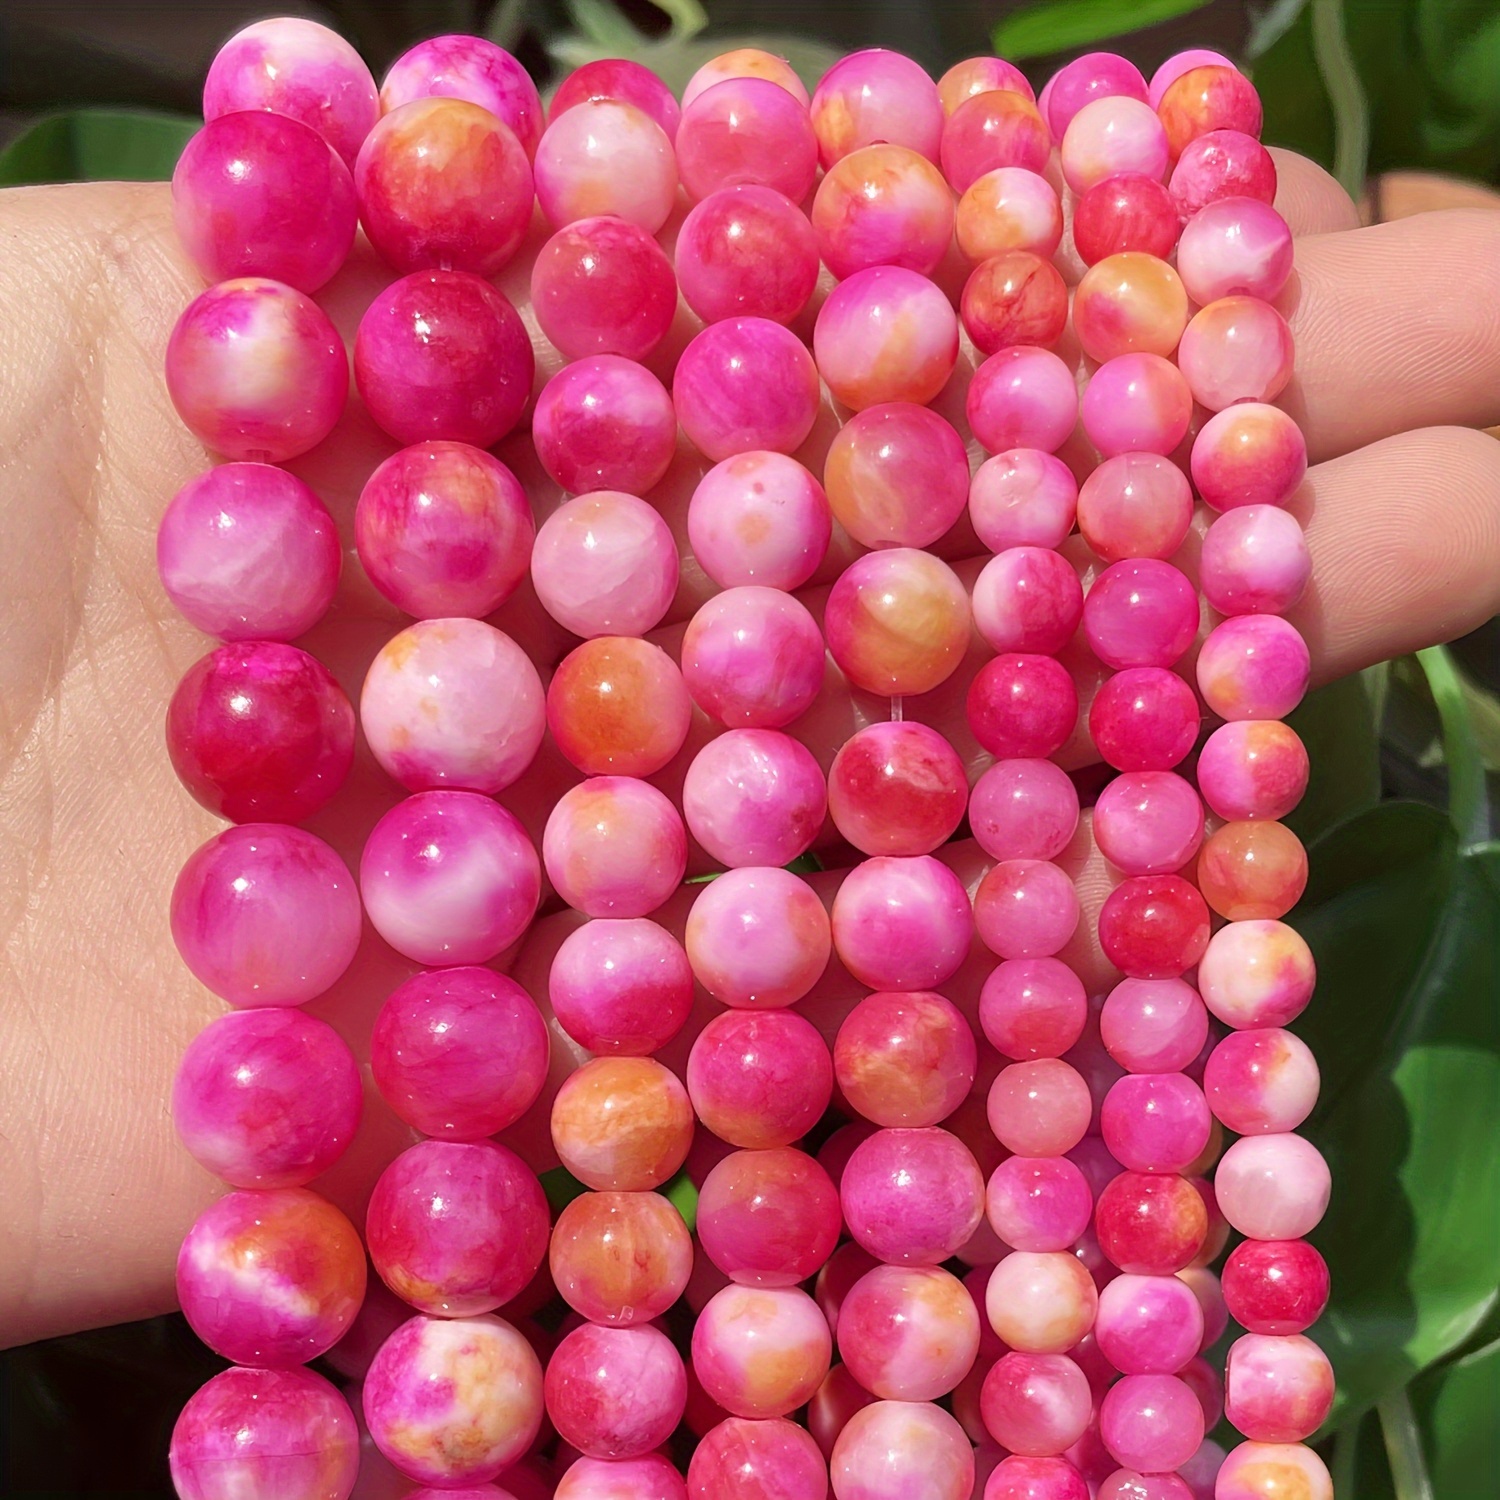 

6/8/10mm Stone Loose Spaced Beads For Diy Special Fashion Bracelet Necklace Earrings Jewelry Making Handmade Craft Supplies